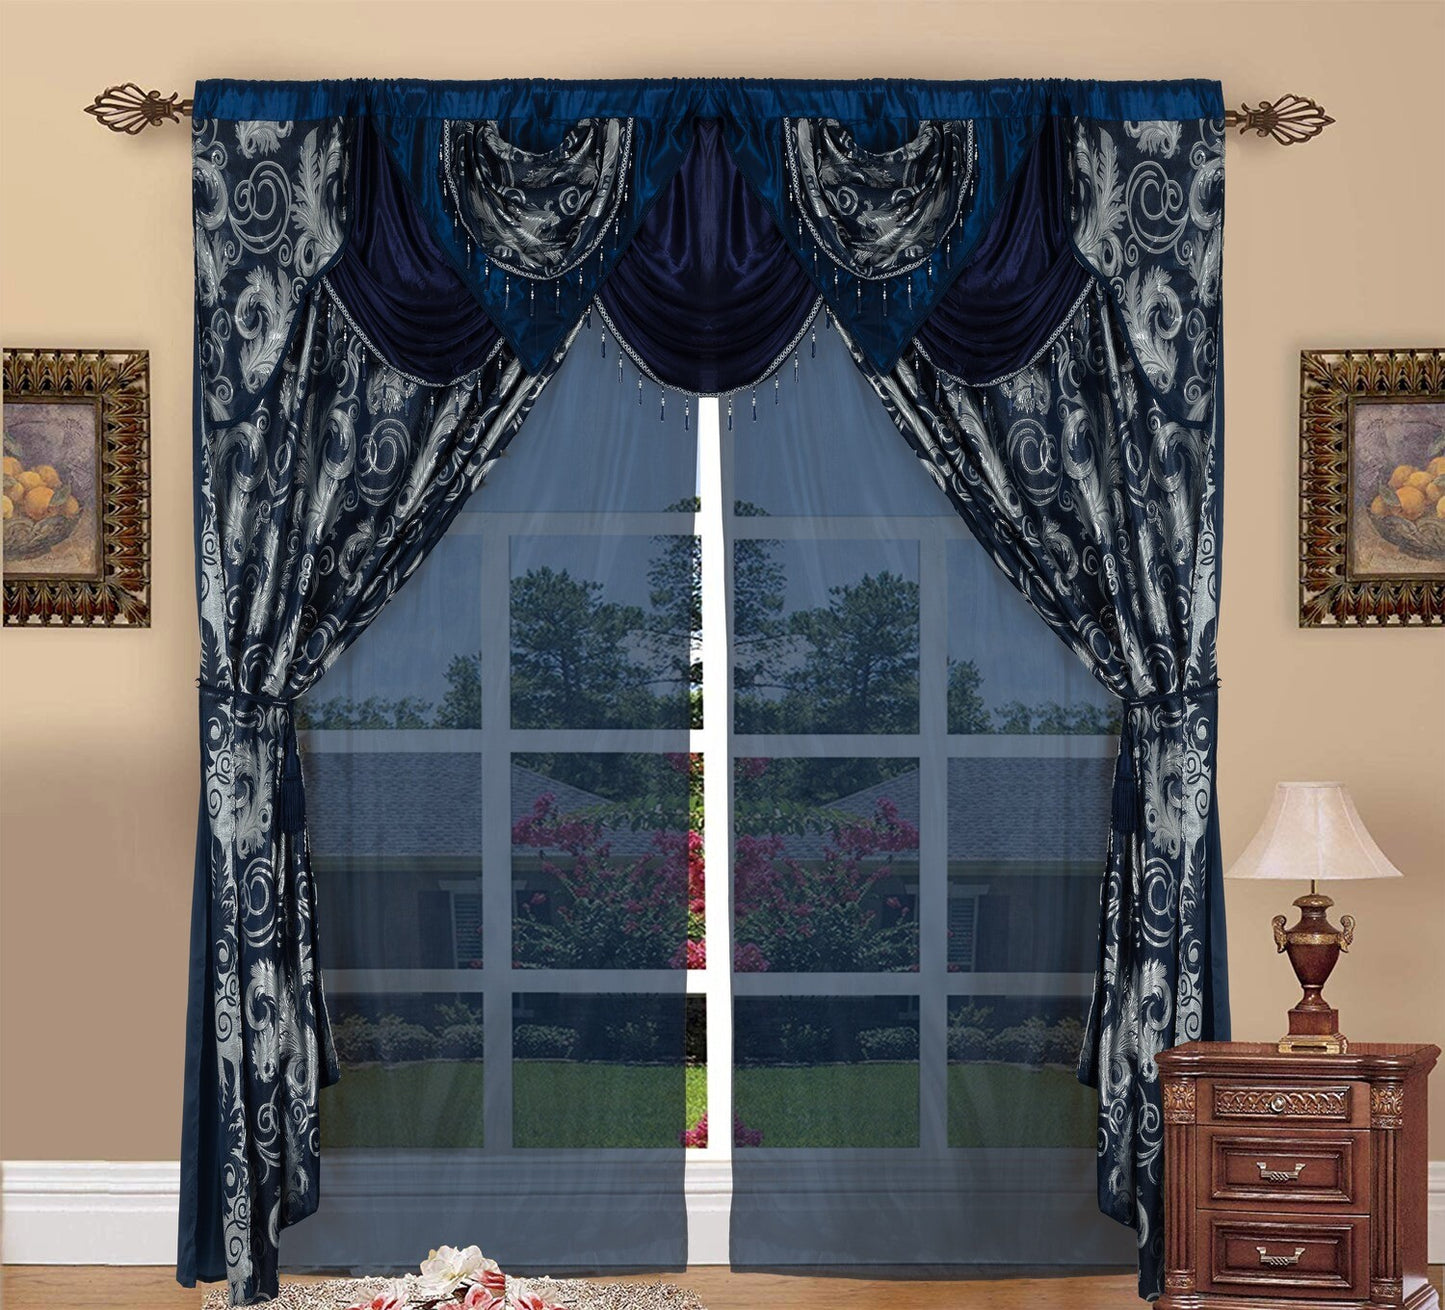 Glory Rugs Jacquard Luxury Curtain Window Panel Set Curtain with Attached Valance and Backing Bedroom Living Room Dining 110"X84" Each Jana Navy